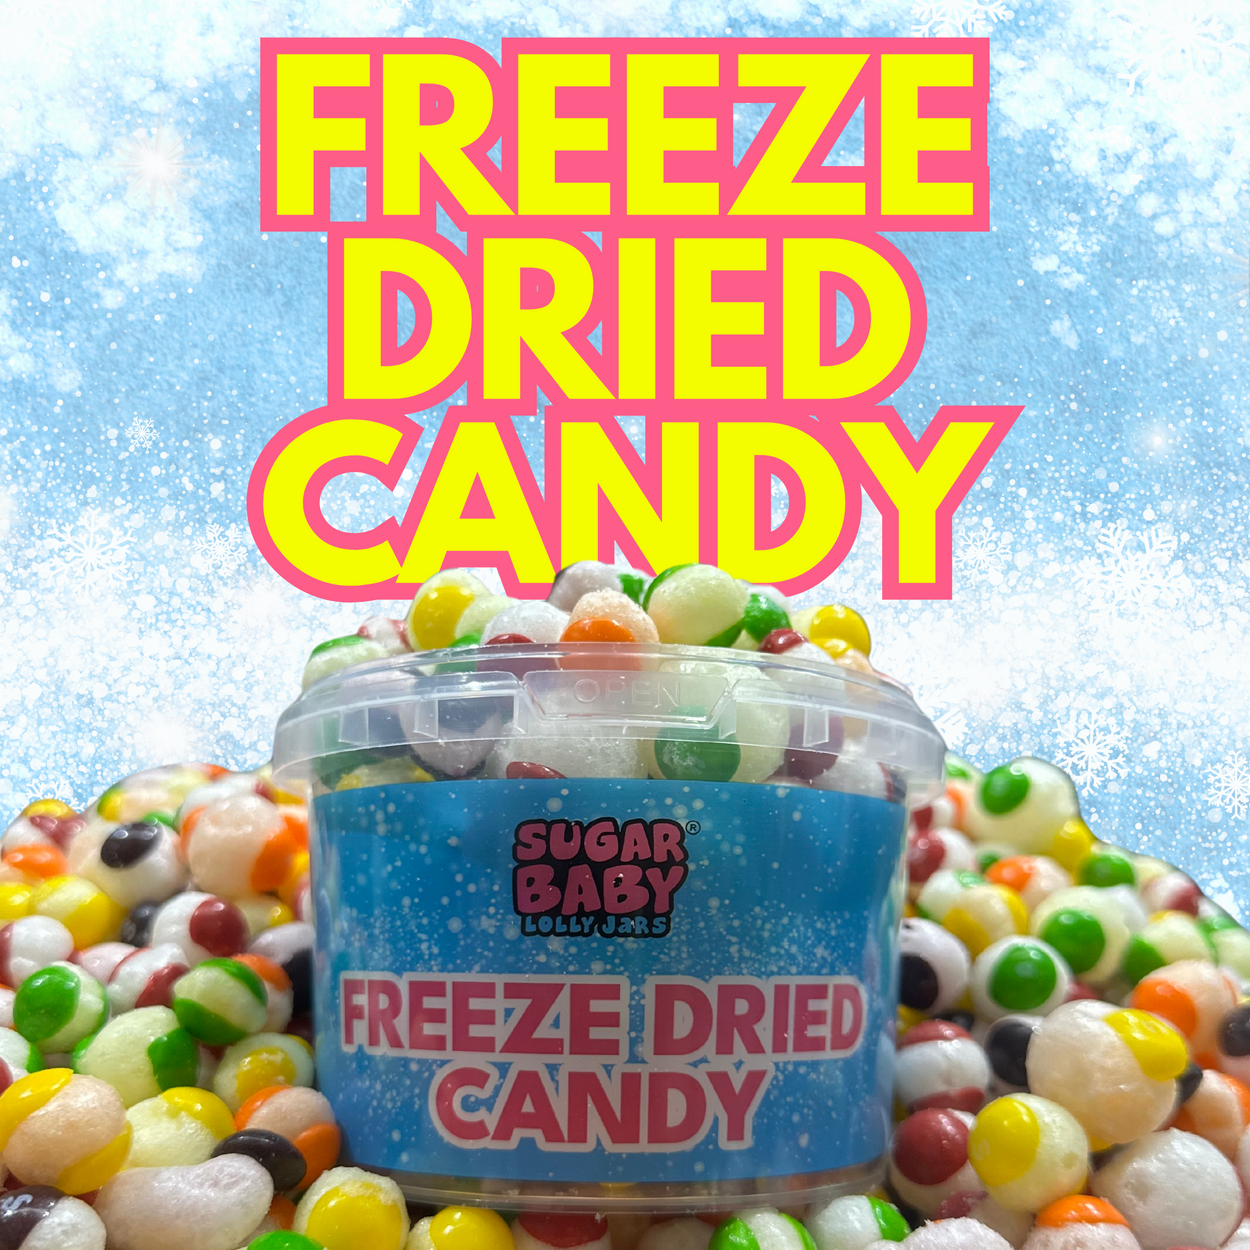 FREEZE DRIED CANDY